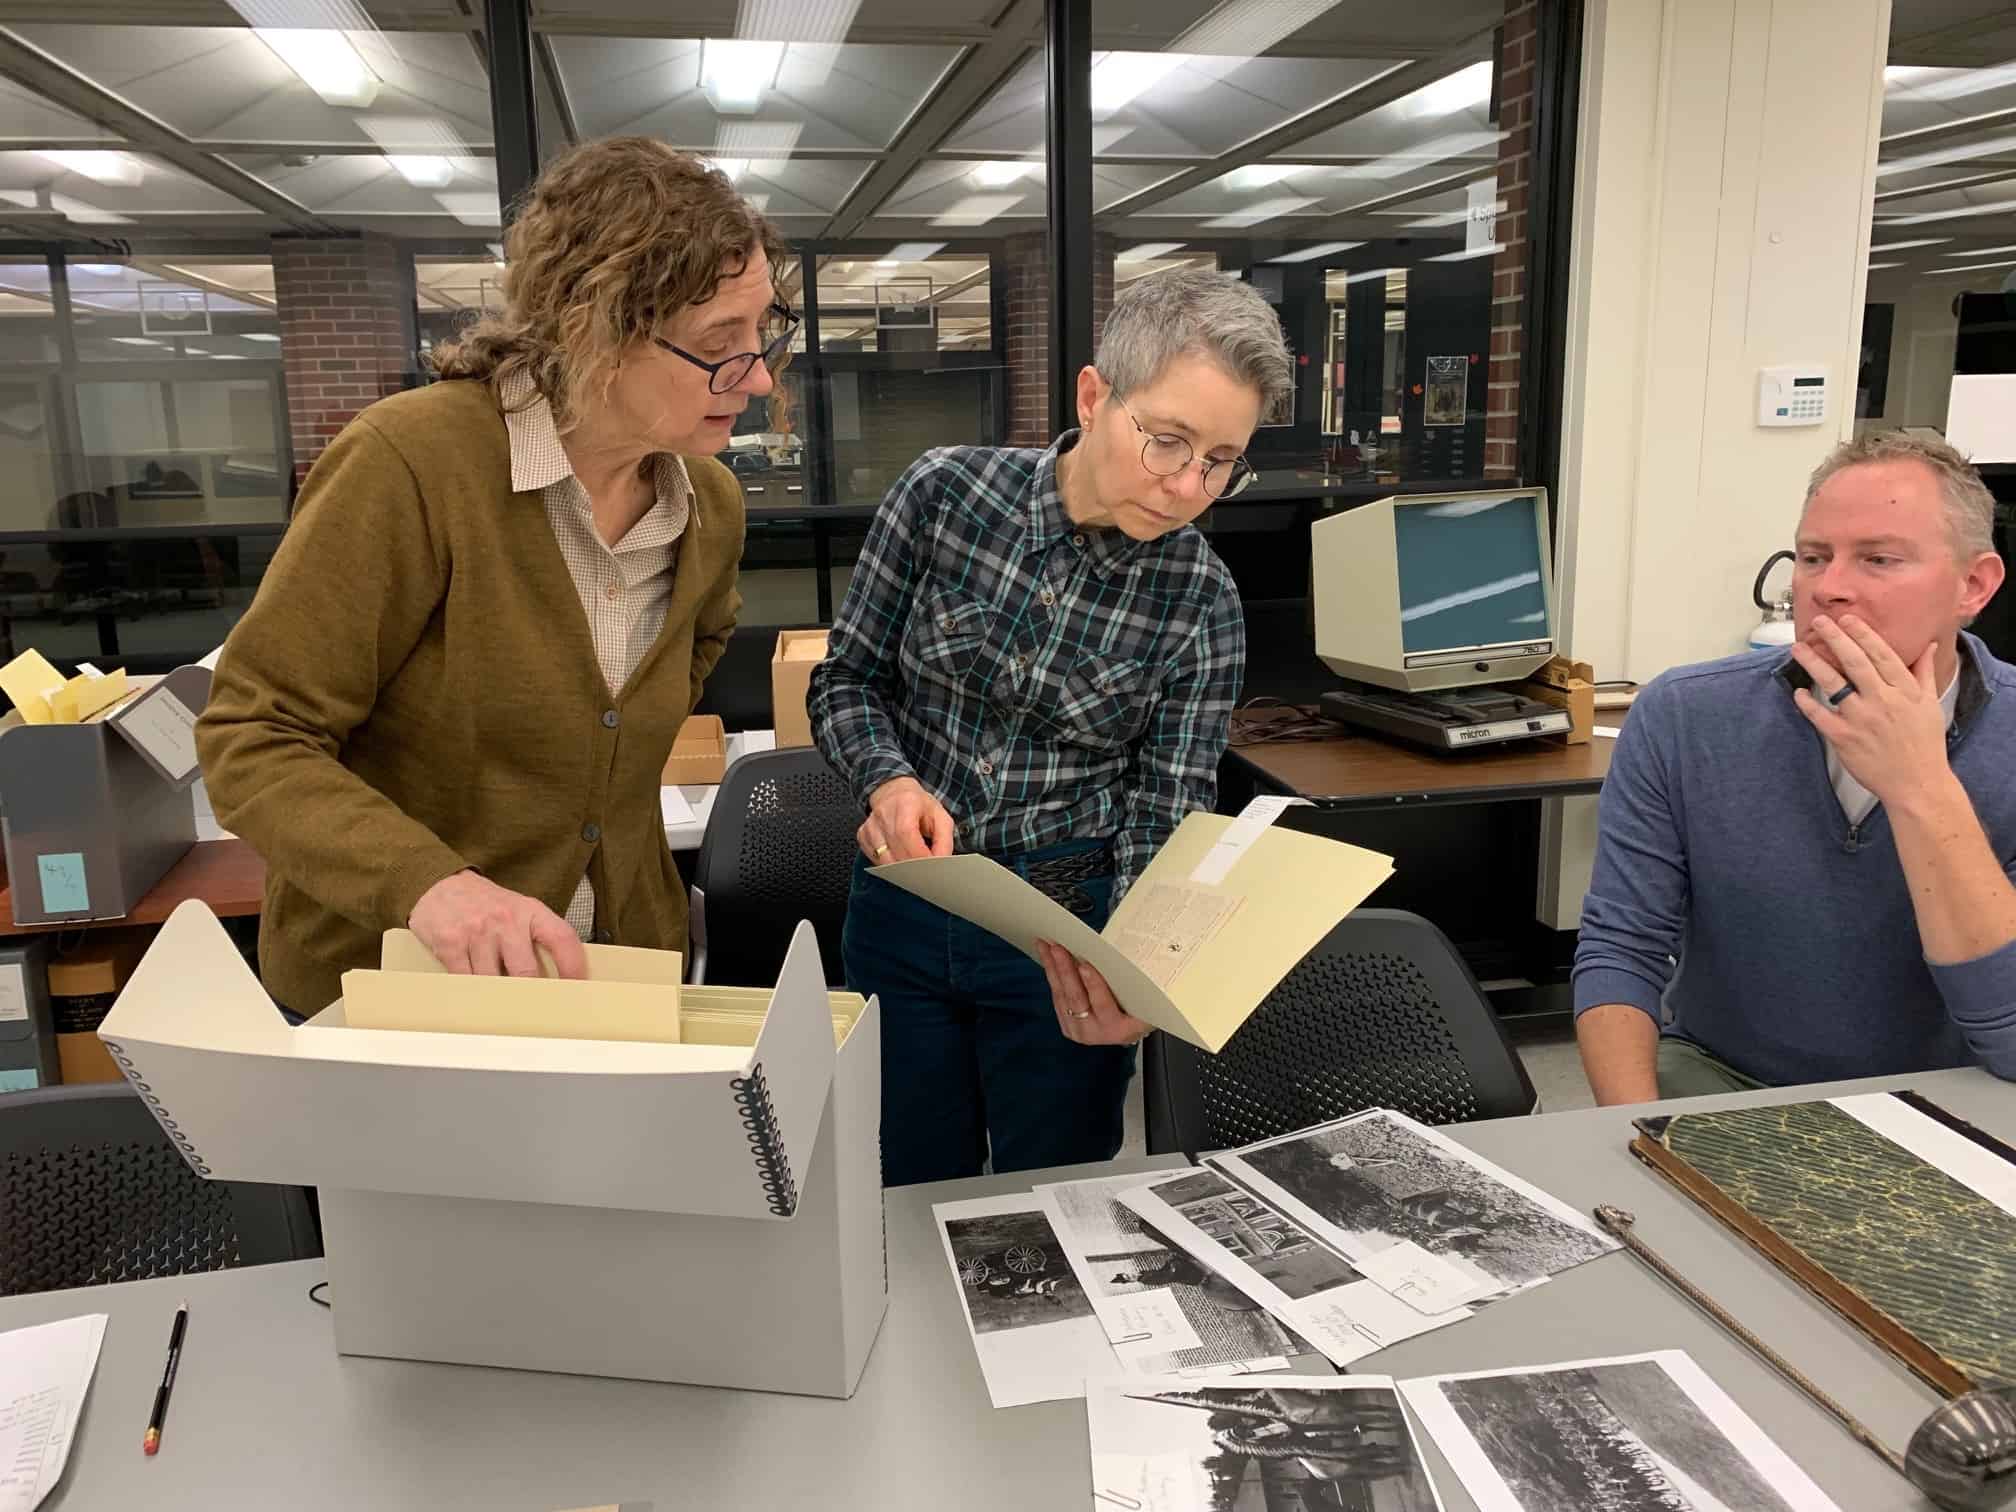 Three people look through archival files as they plan an exhibition for the Main Library Gallery.